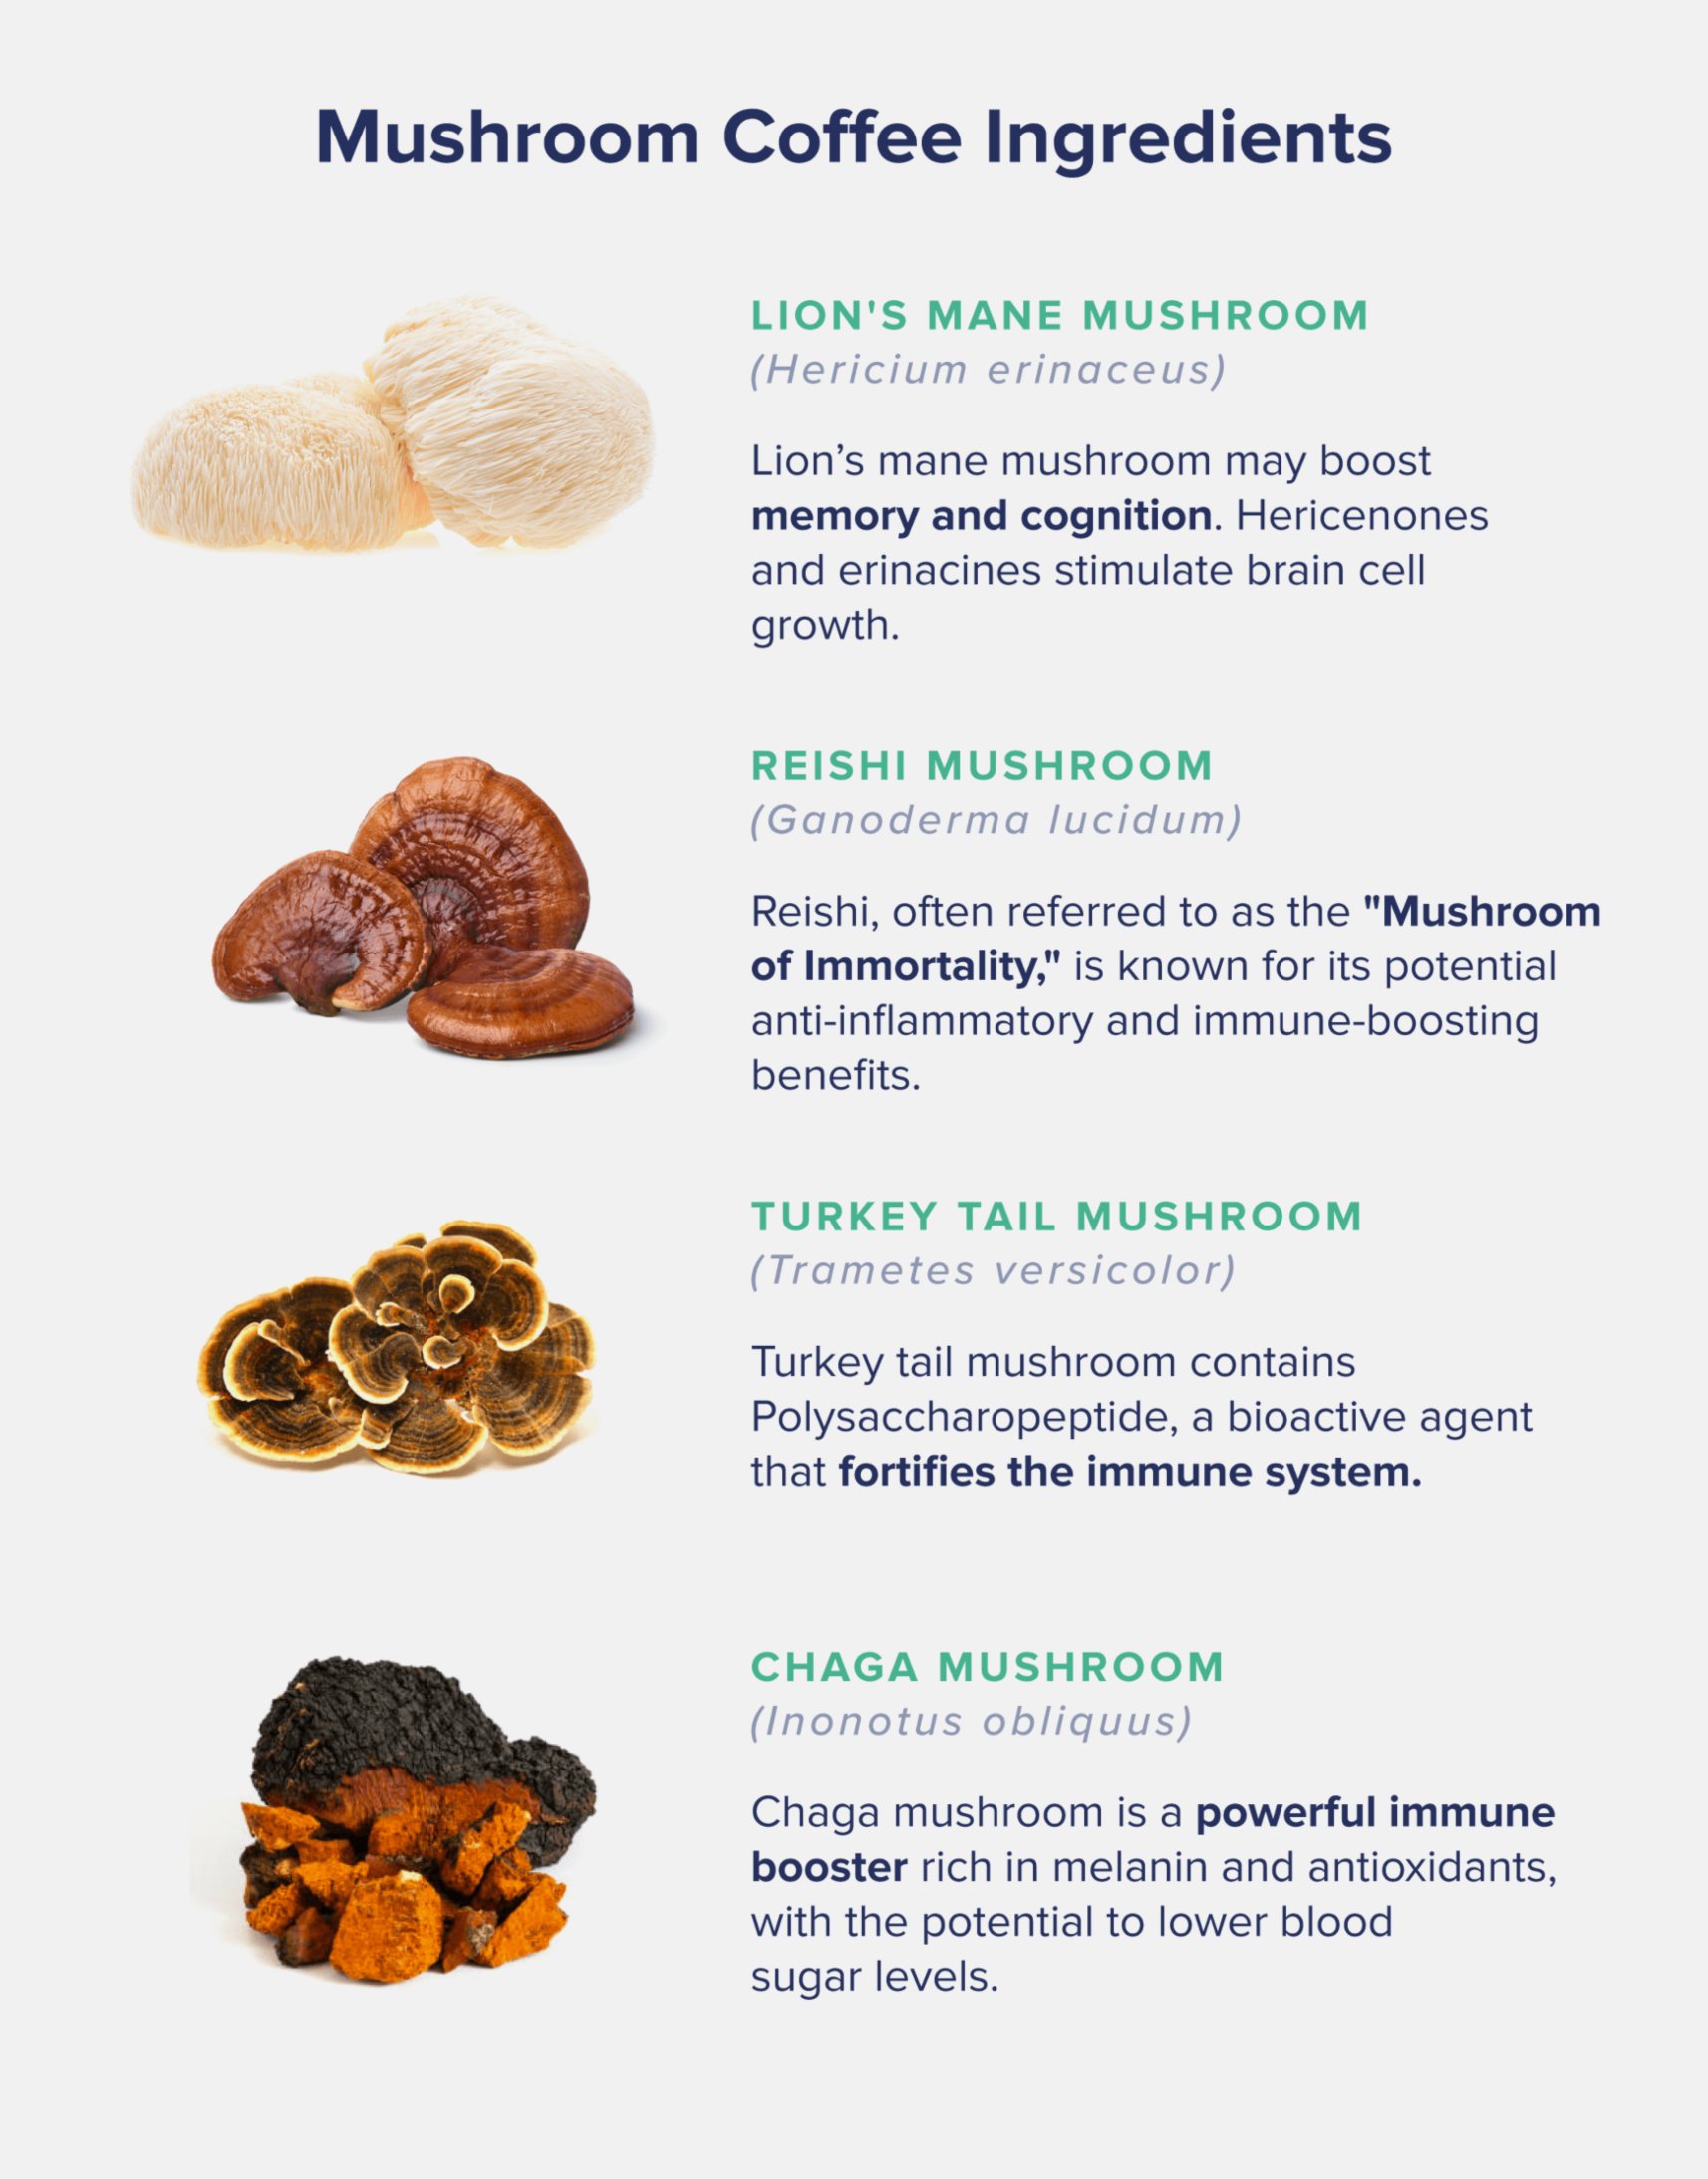 A graphic entitled "Mushroom Coffee Ingredients" showing pictures and brief descriptions of the ingredients in Lion's Mane, Reishi, Turkey Tail, and Chaga mushrooms.